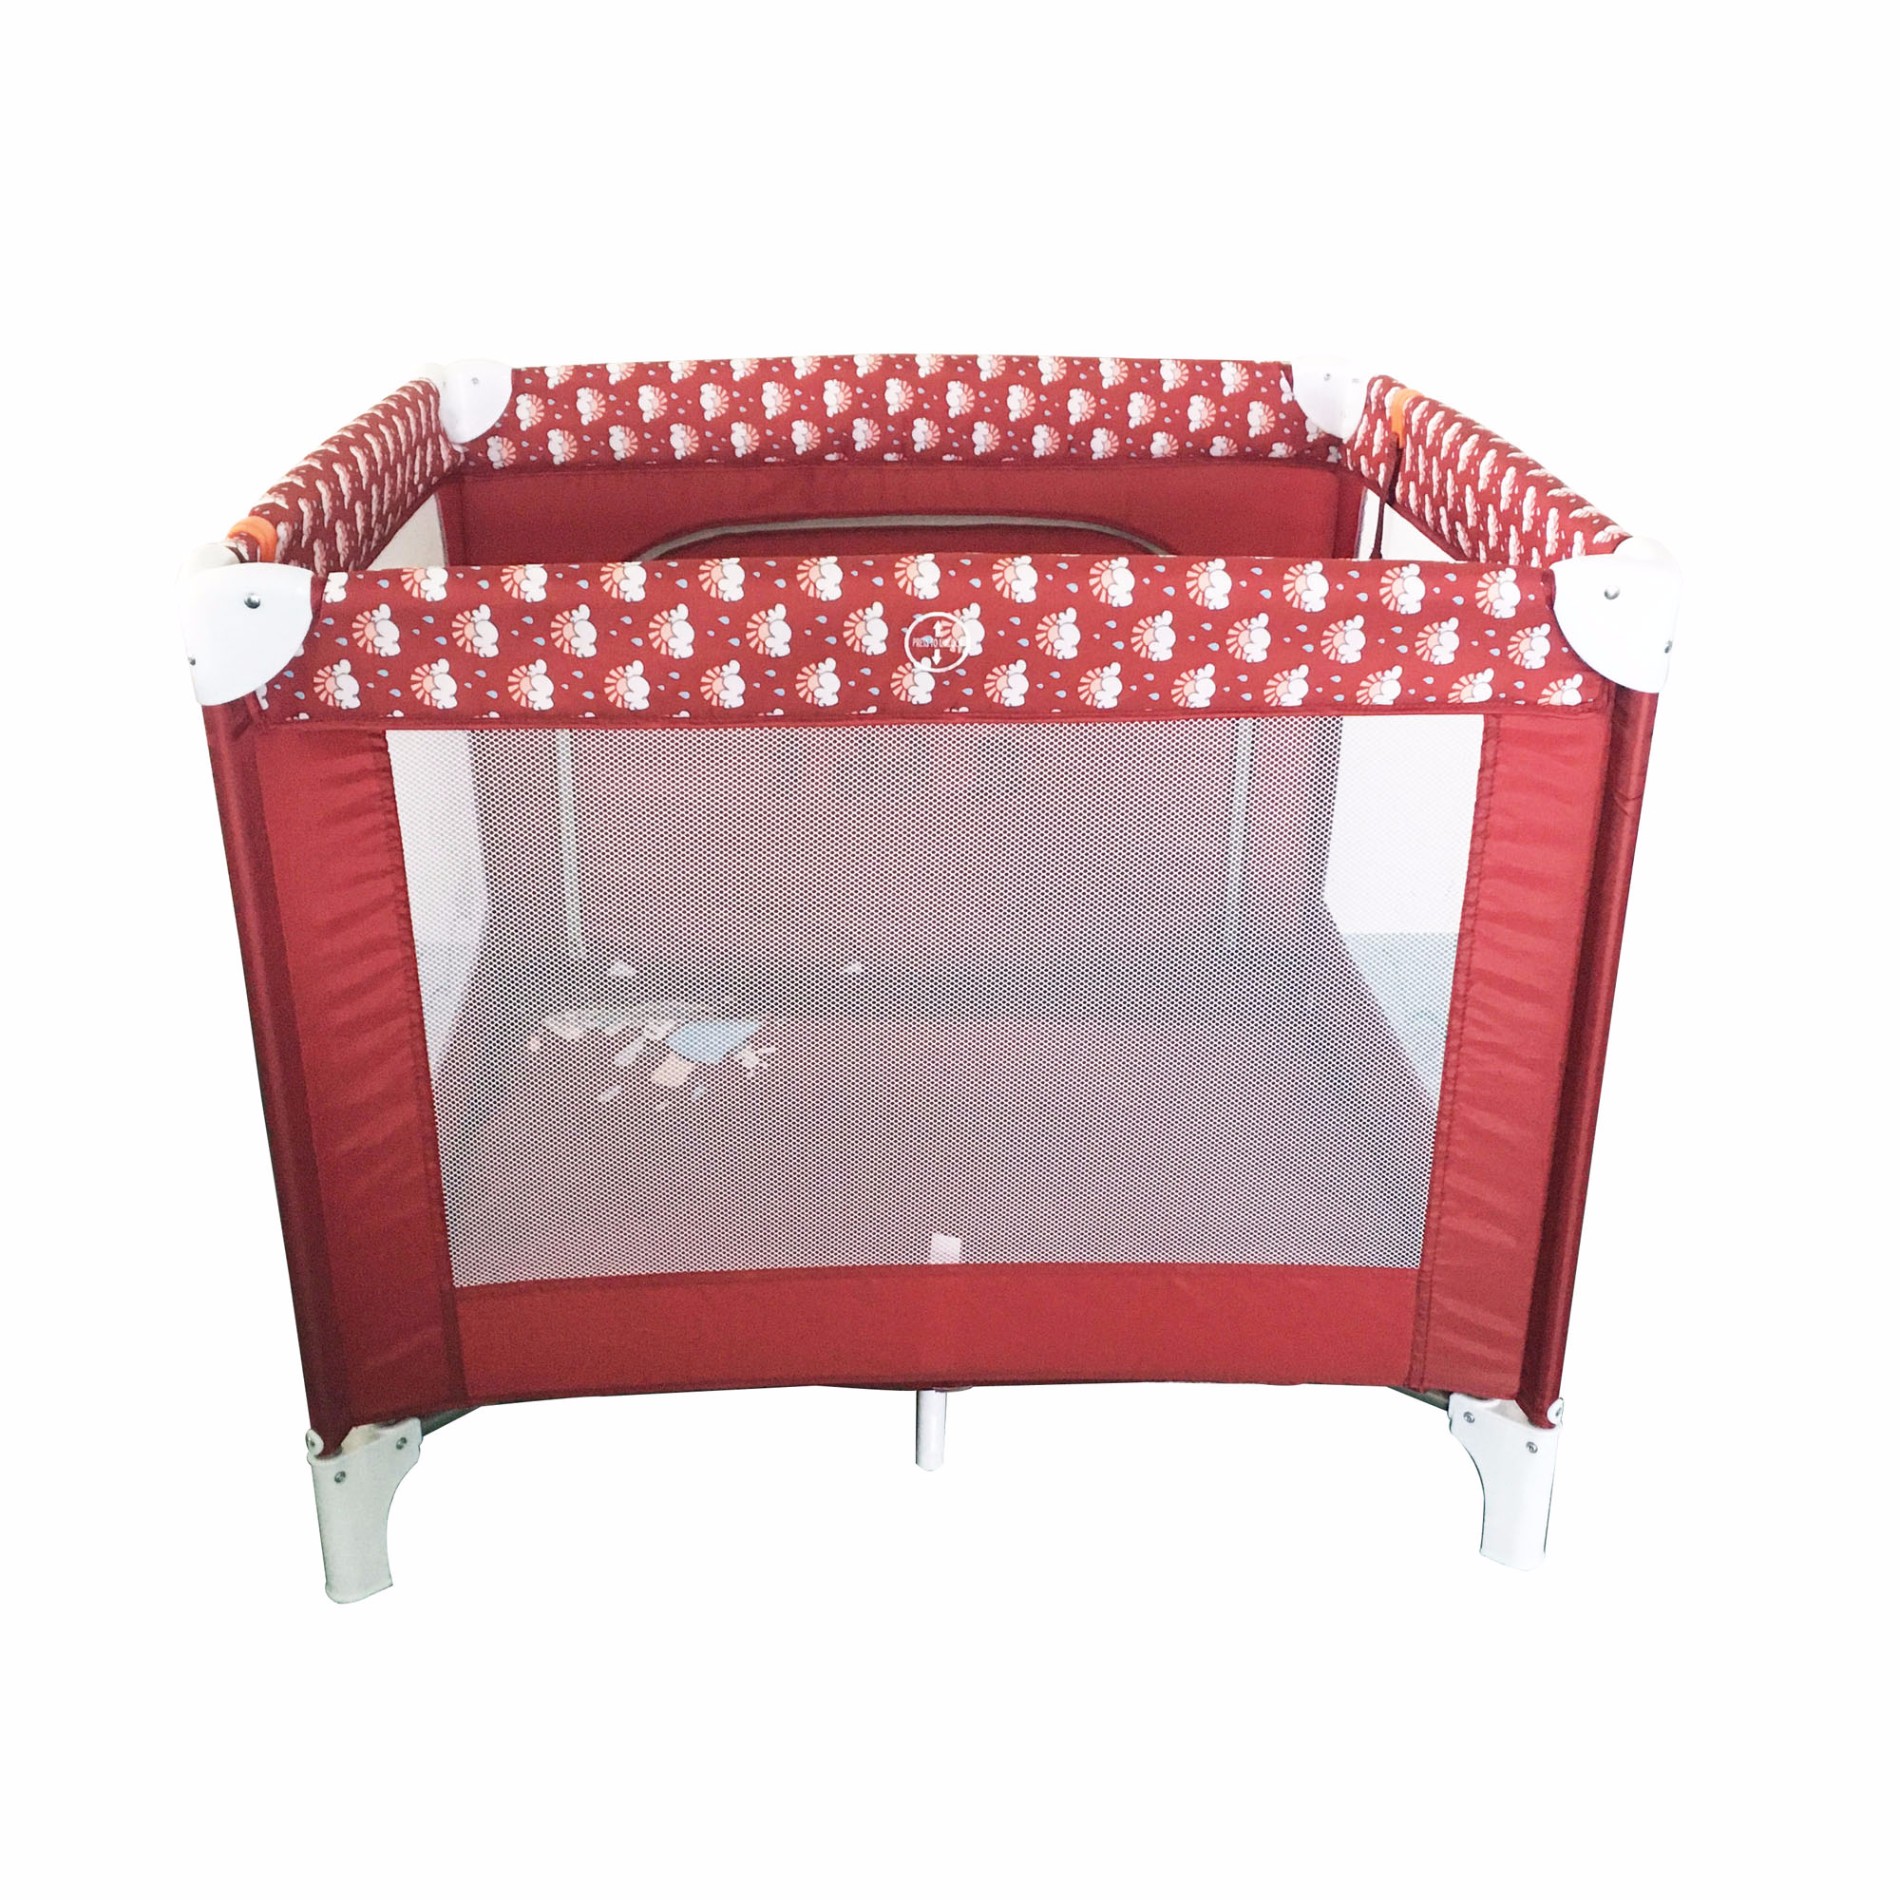 Portable Travel Cot For Toddler Factory